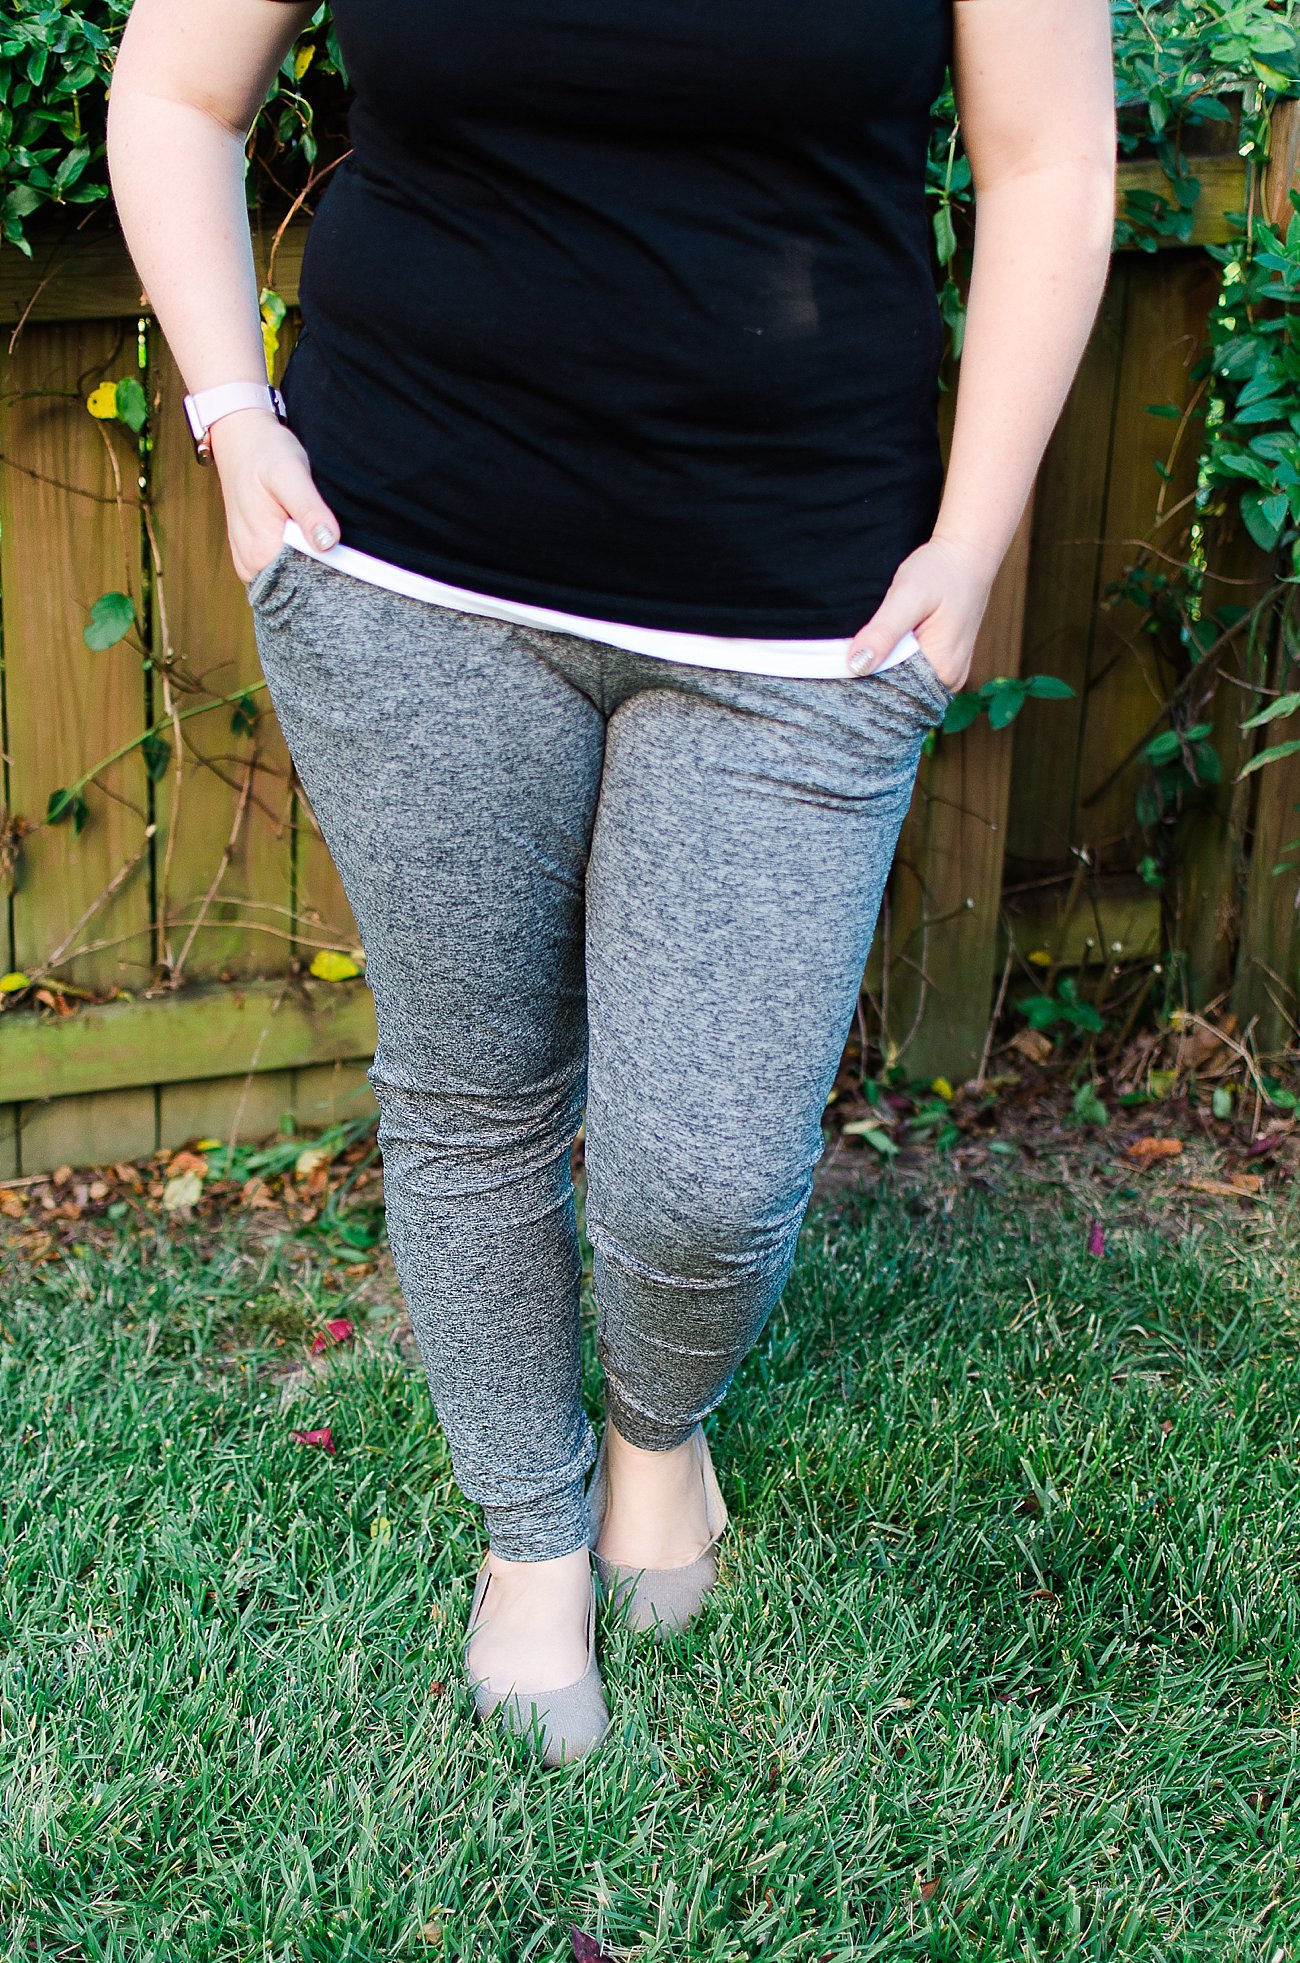 Stitch Fix Good hYOUman "Teighlor Slim Fit Drawstring Jogger Pant" - Size XL - $78 (Made in the USA!)